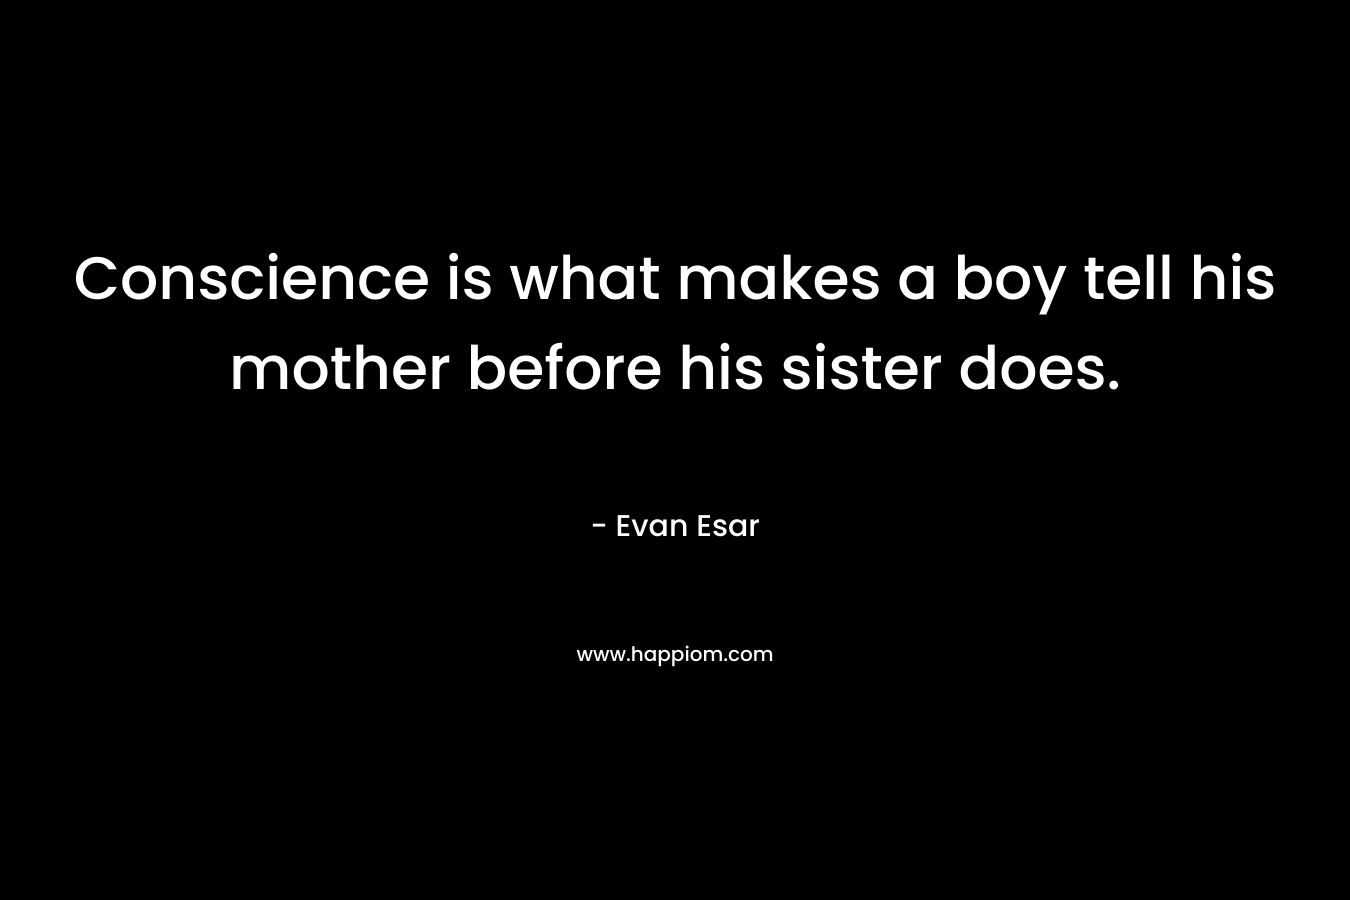 Conscience is what makes a boy tell his mother before his sister does. – Evan Esar